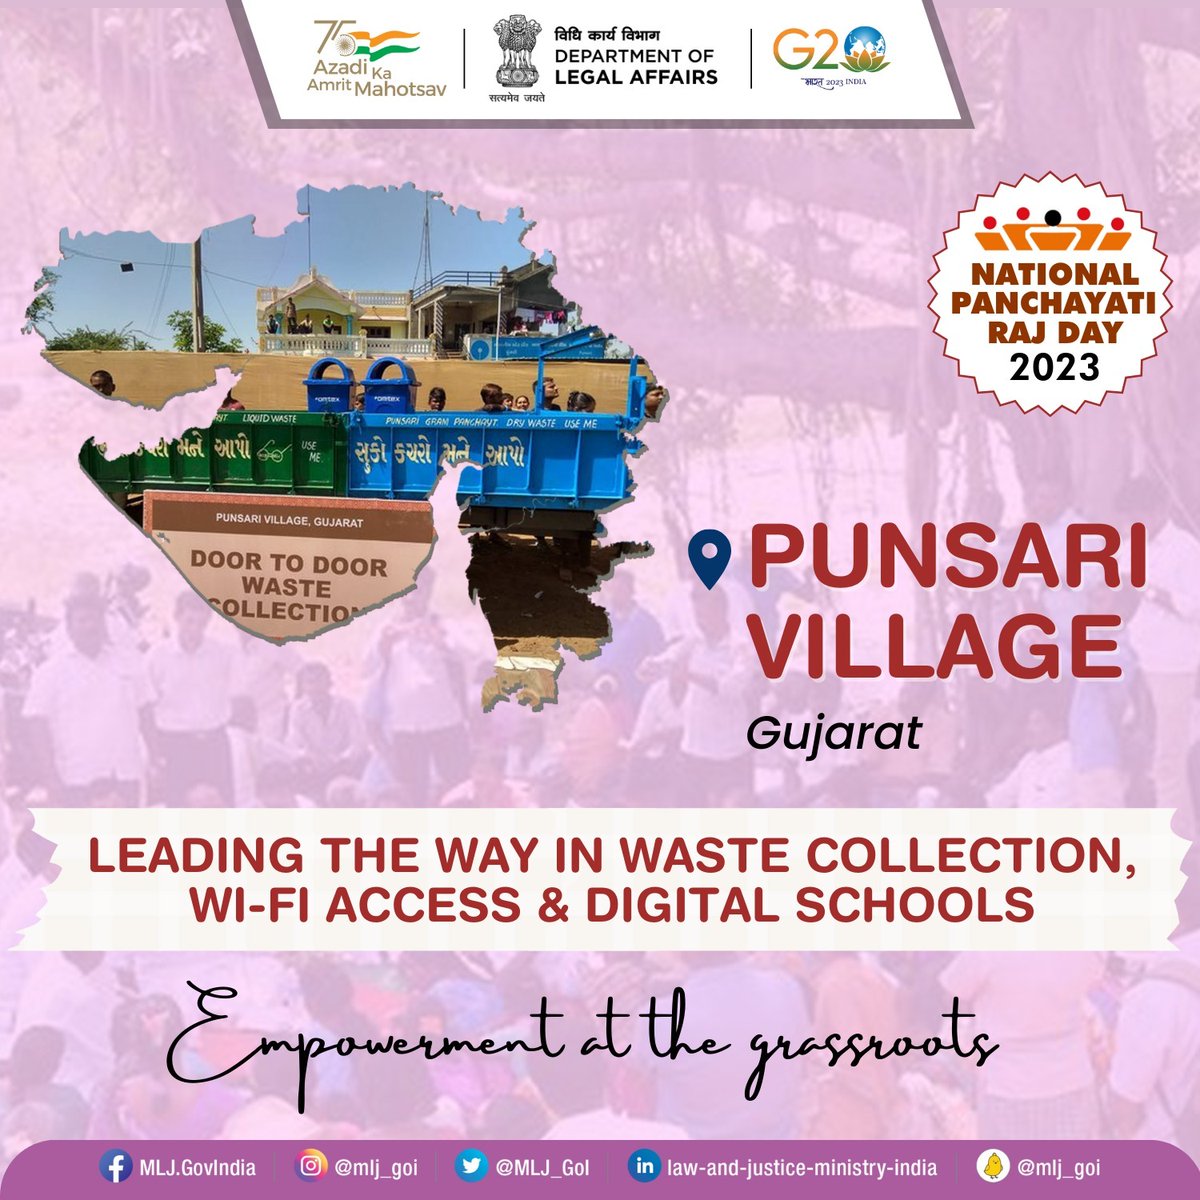 Let's appreciate the collective efforts of Punsari Panchayat for becoming a model for rural development by implementing measures such as 24-hour water supply, free Wi-Fi, 360 CCTV Coverage and promoting entrepreneurship through loans and vocational training.